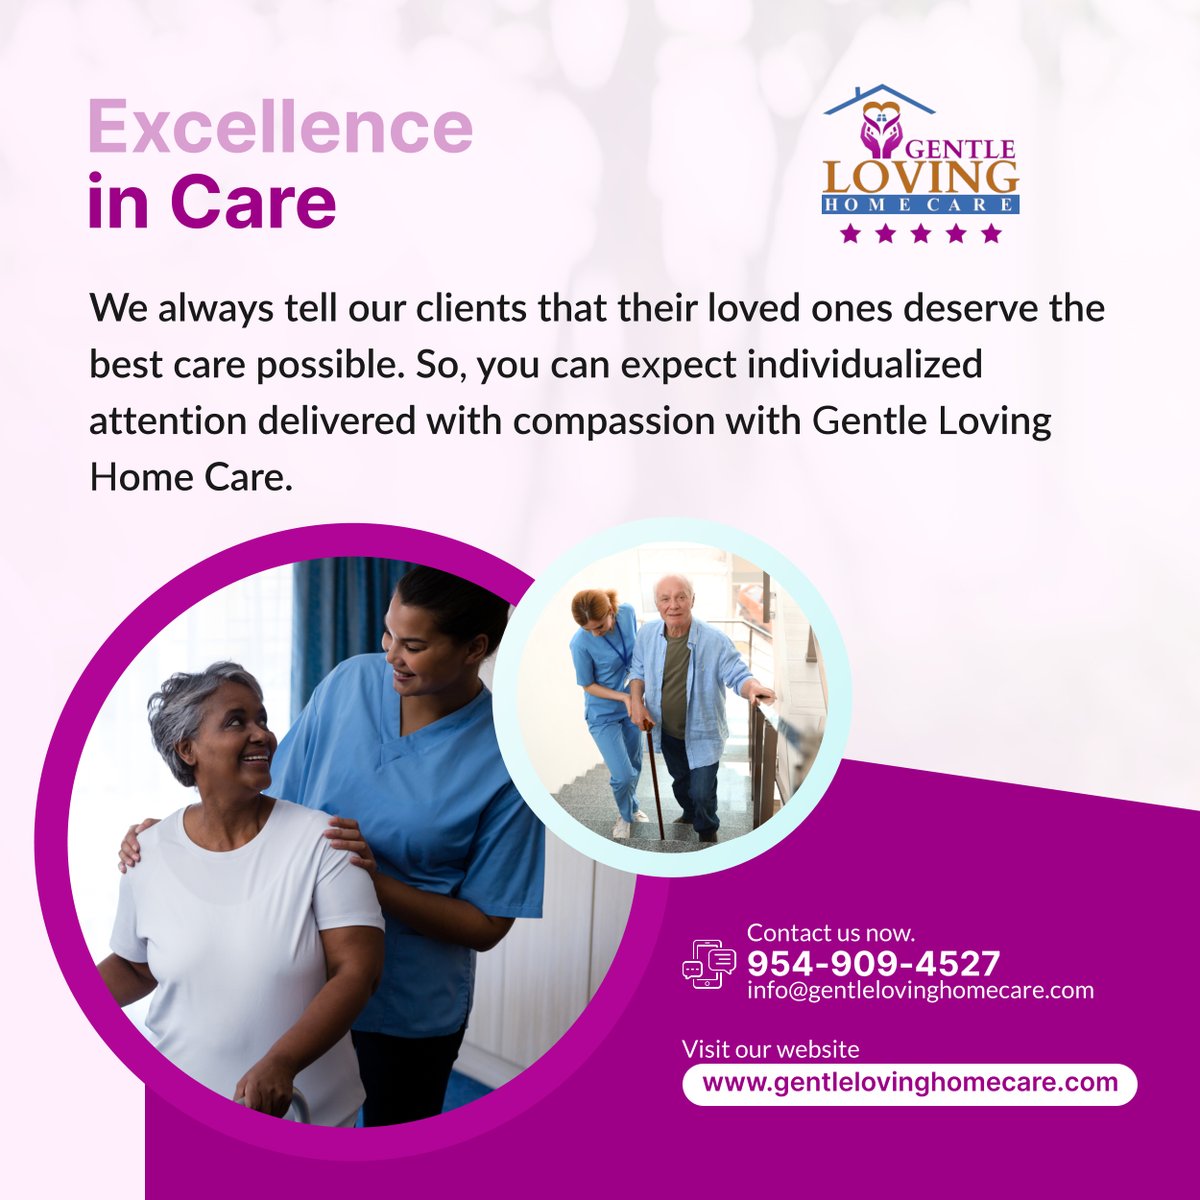 Choose Gentle Loving Home Care for your loved ones, offering personalized attention and compassionate assistance. Call 954-909-4527 today to provide exceptional care for those who matter most.

#HomeCare #PersonalizedAttention #CompassionateAssistance #ExceptionalCare